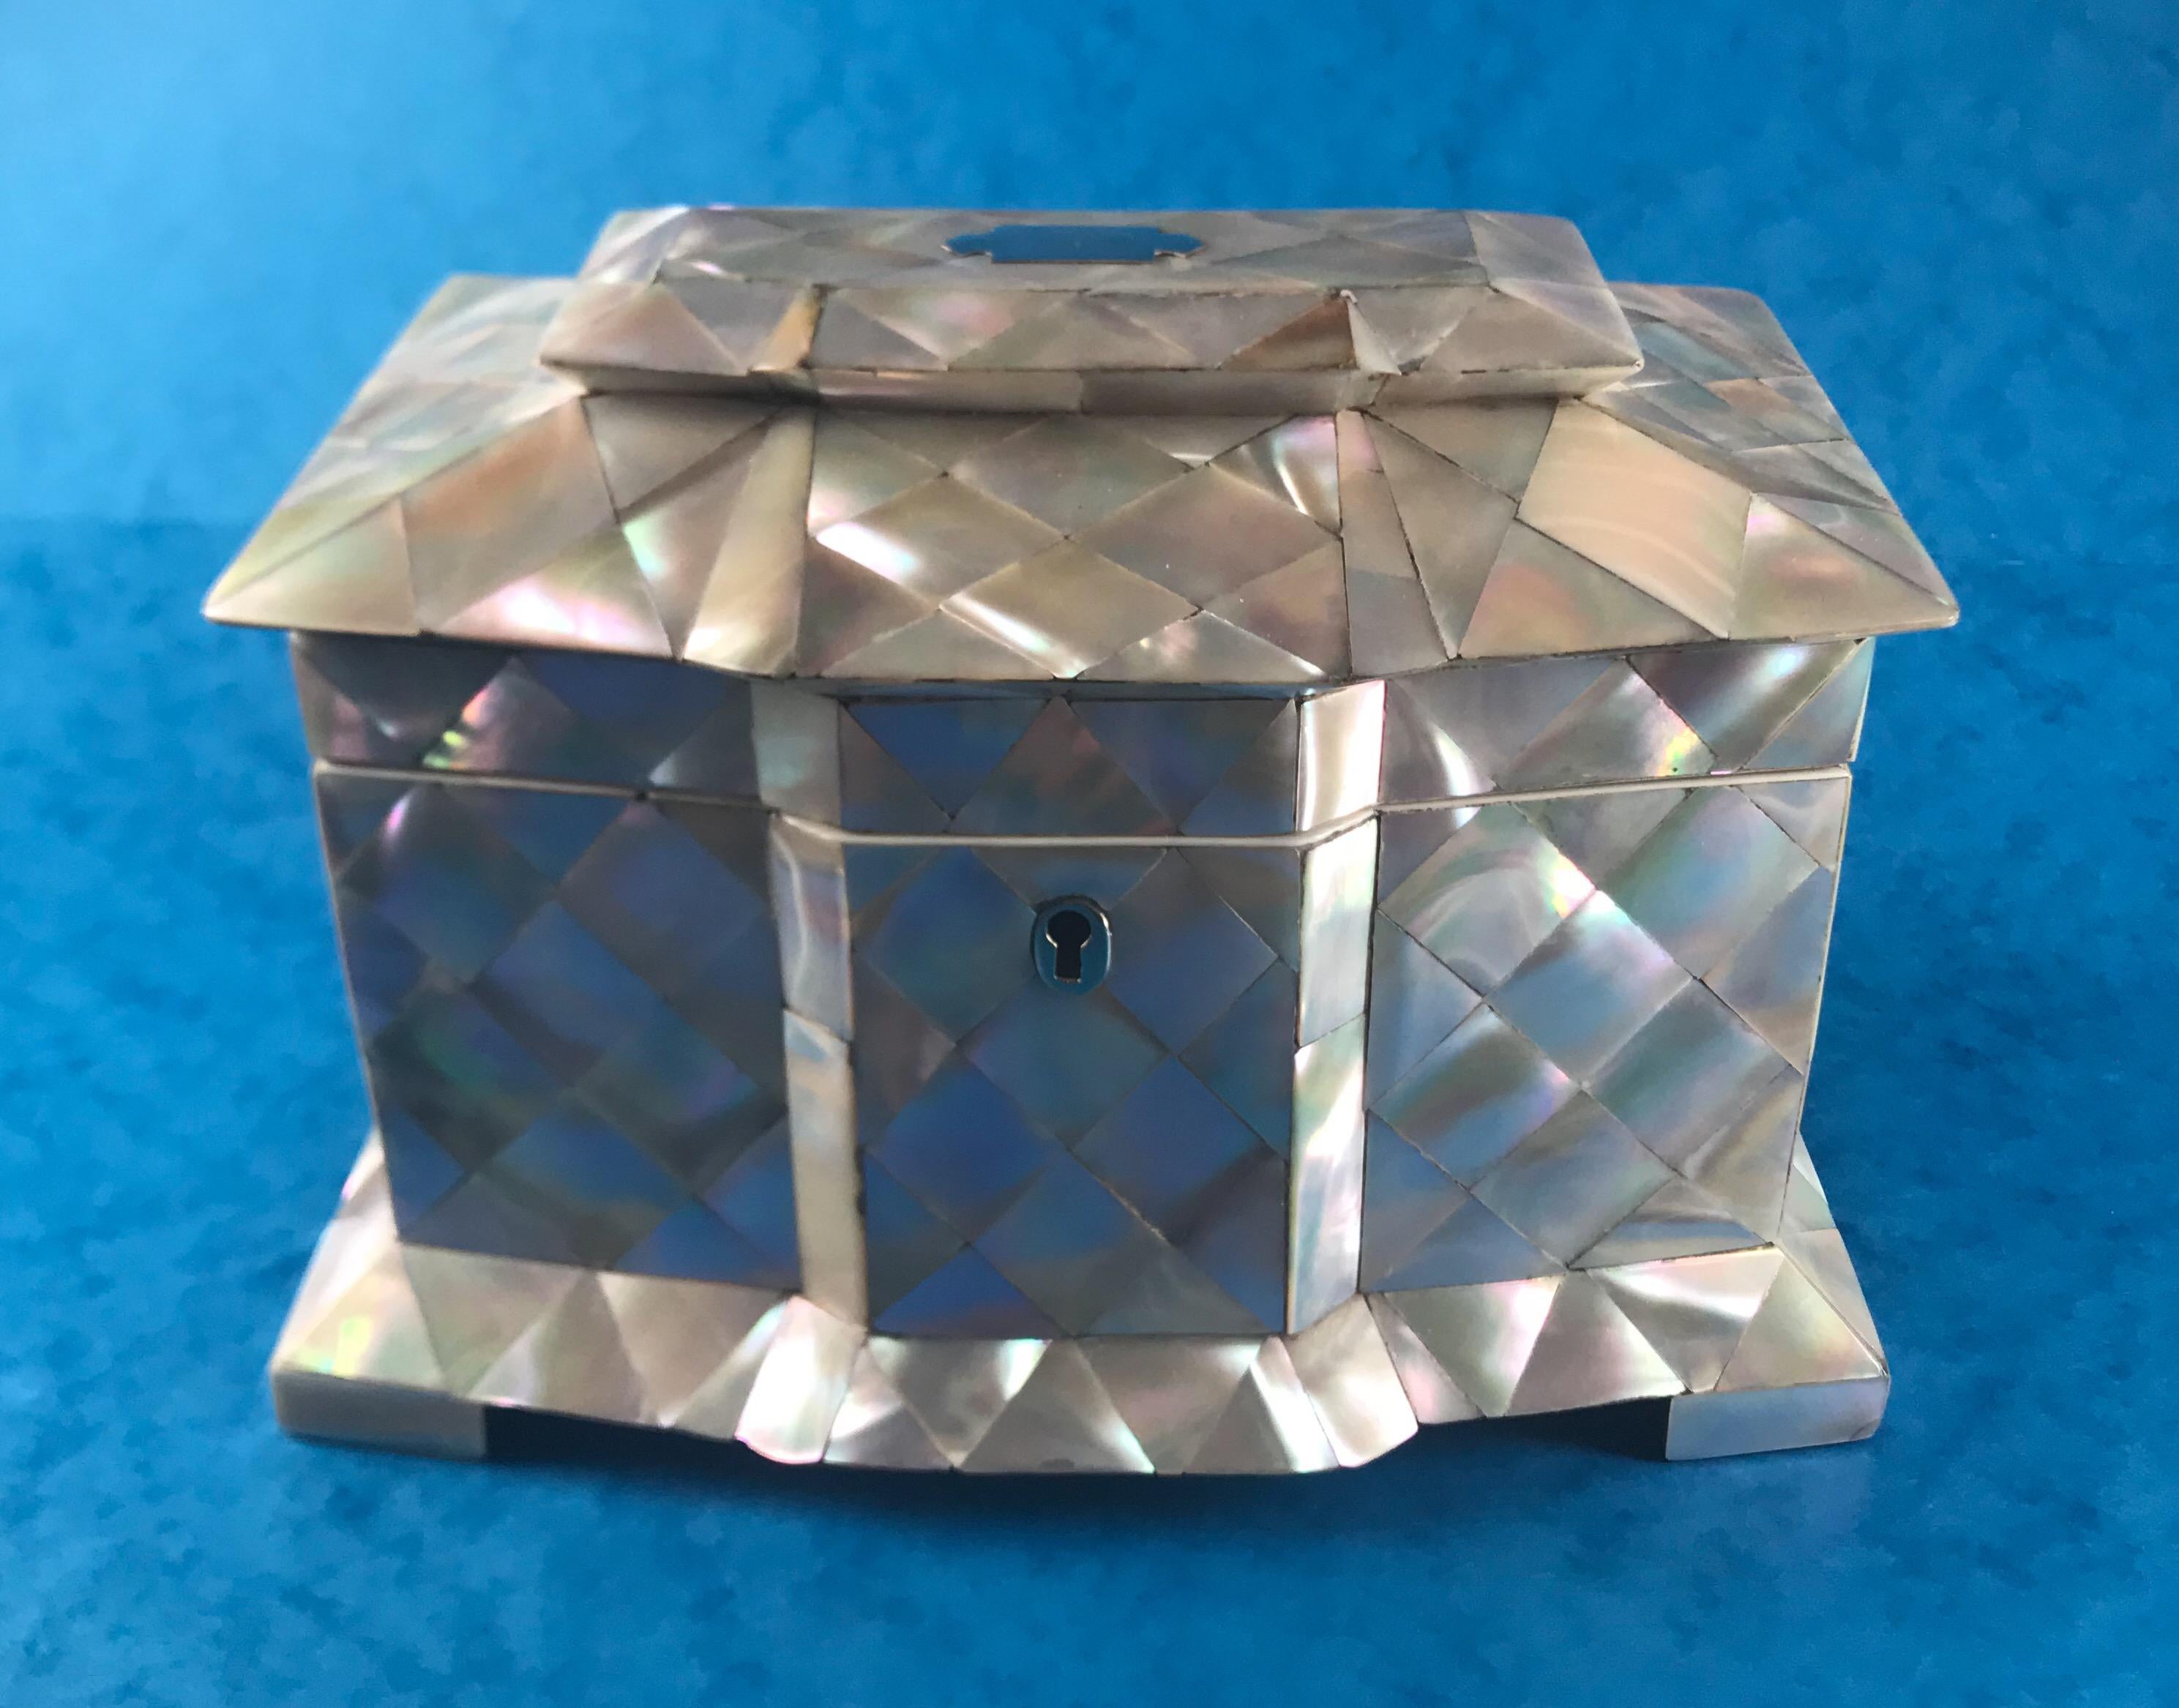 A 1840 Mother of pearl break front twin lidded tea caddy in superb condition, it has its original move velvet interior to the back of the lid and its original led lining interior. It has a working lock and key and a it measures 21 cm by 14 and